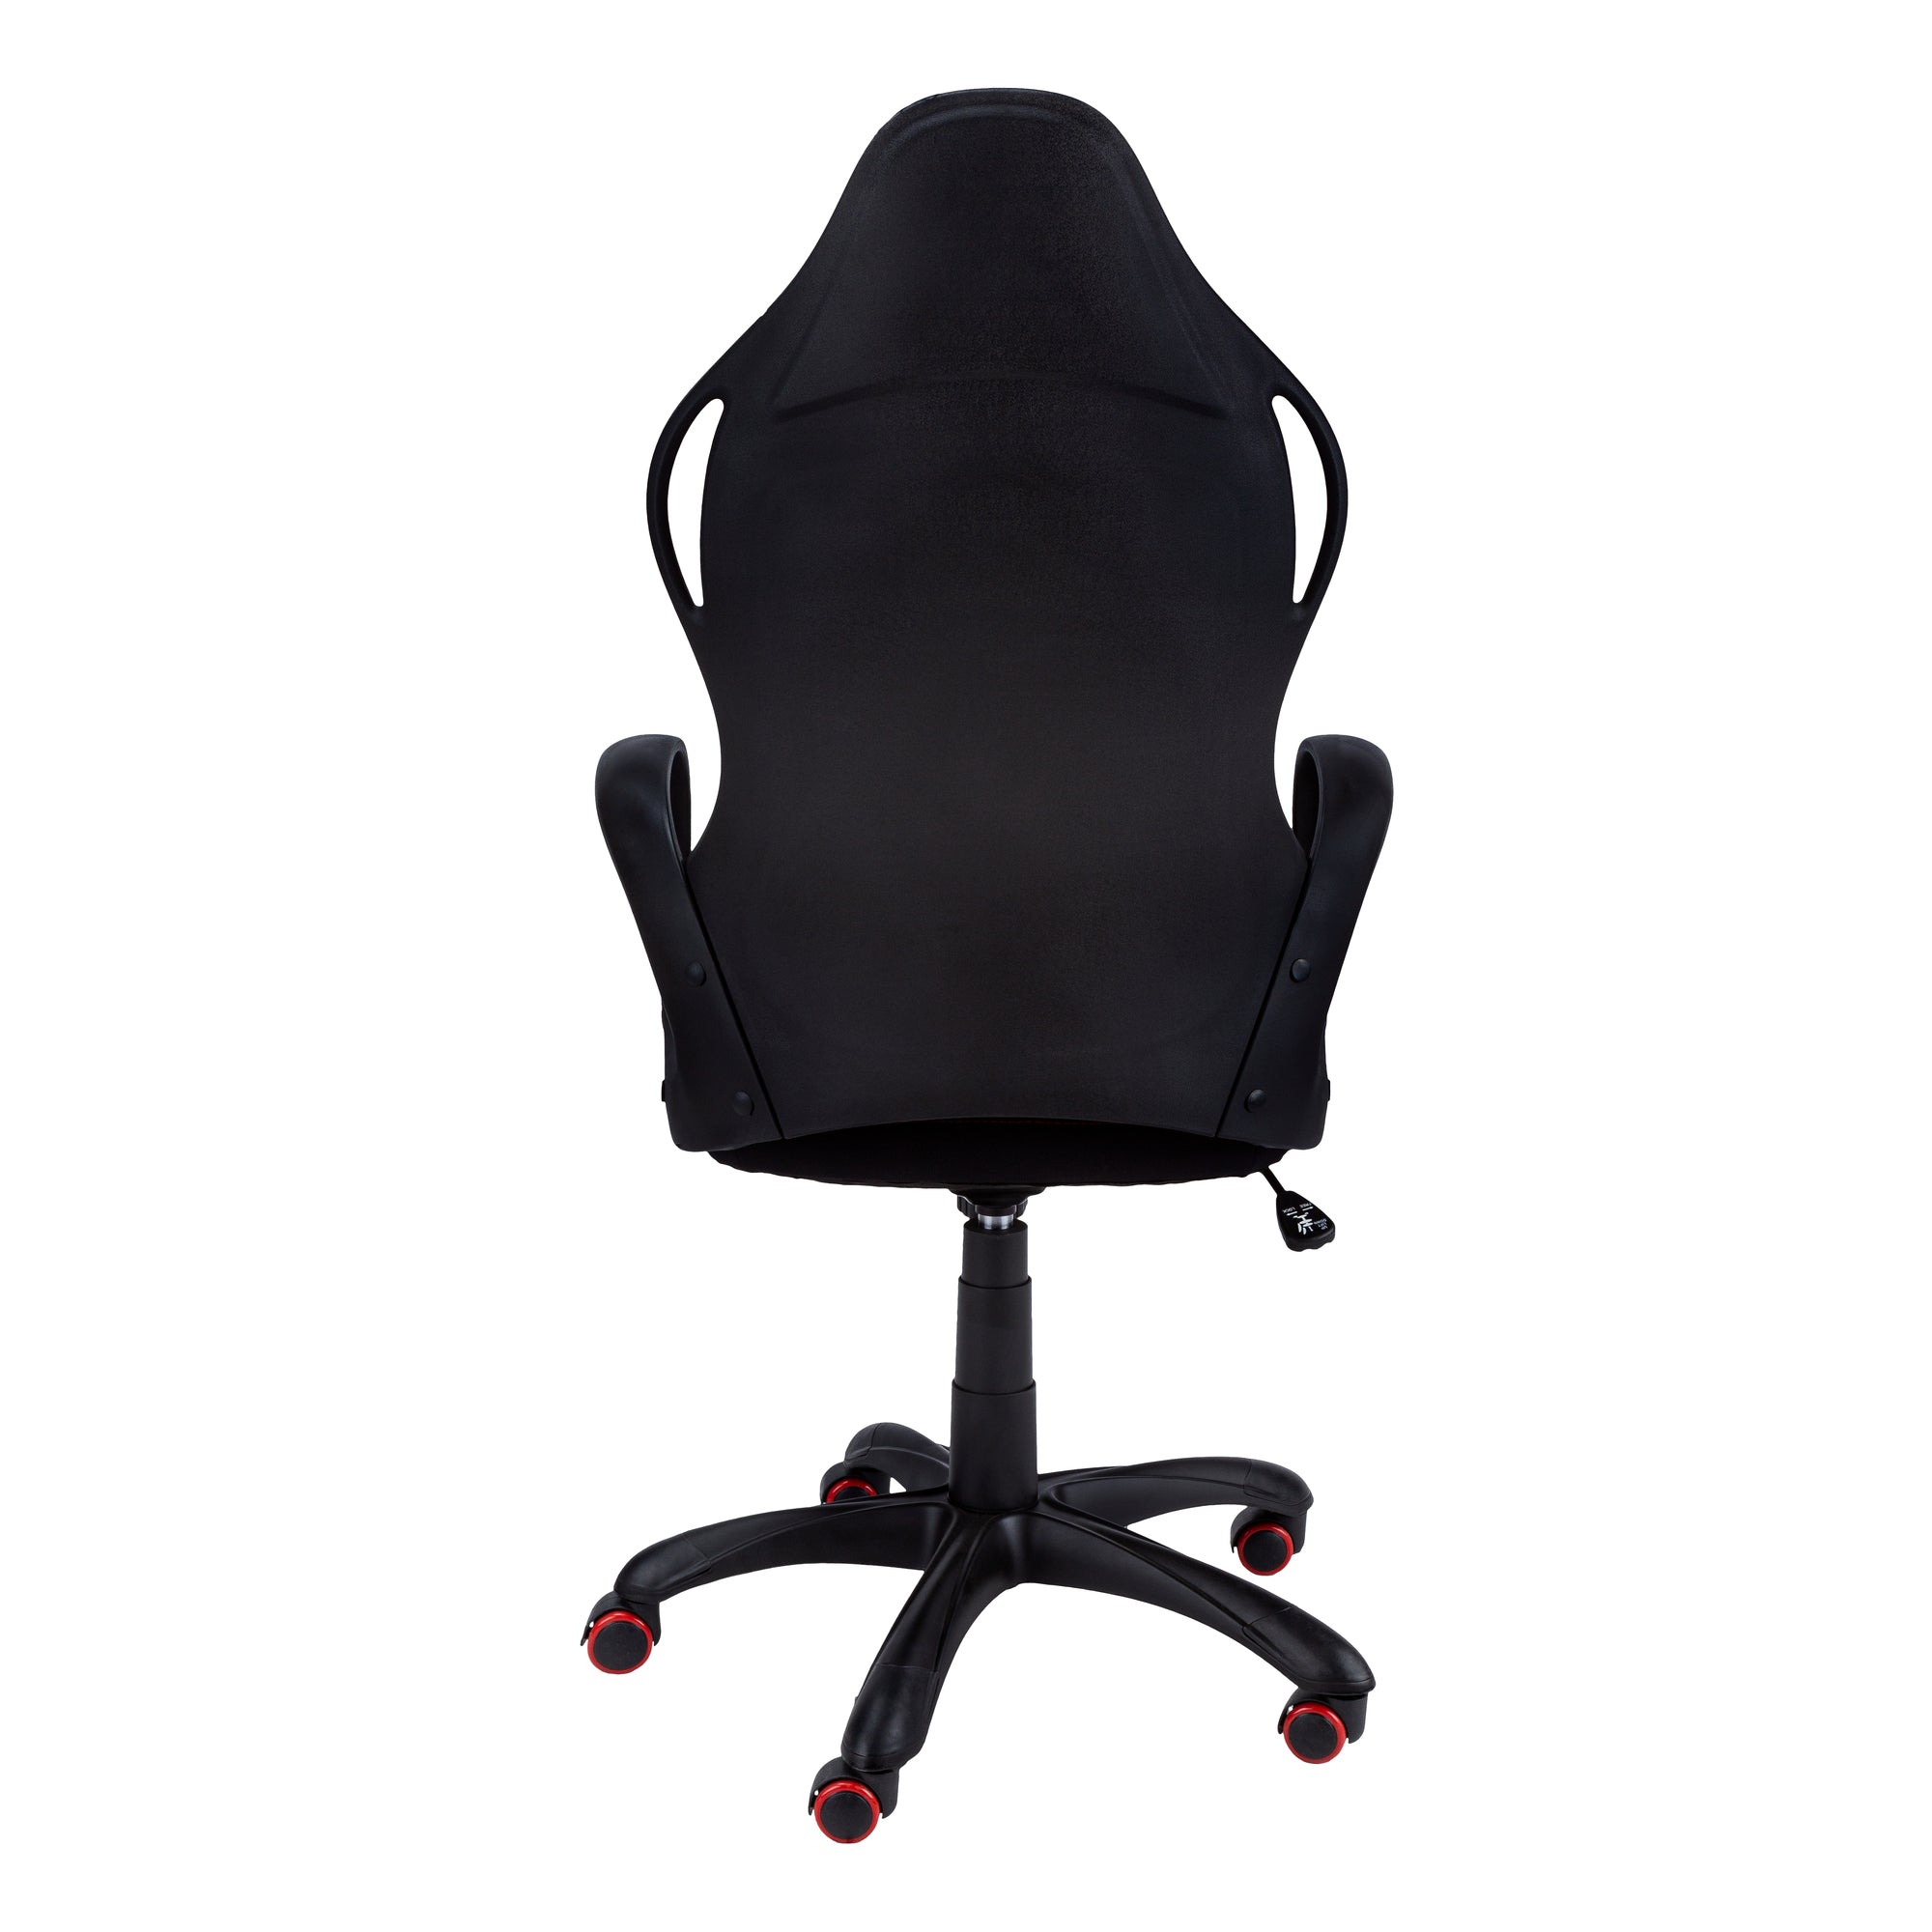 Black Fabric Tufted Seat Swivel Adjustable Gaming Chair Fabric Back Plastic Frame - Tuesday Morning-Office Chairs